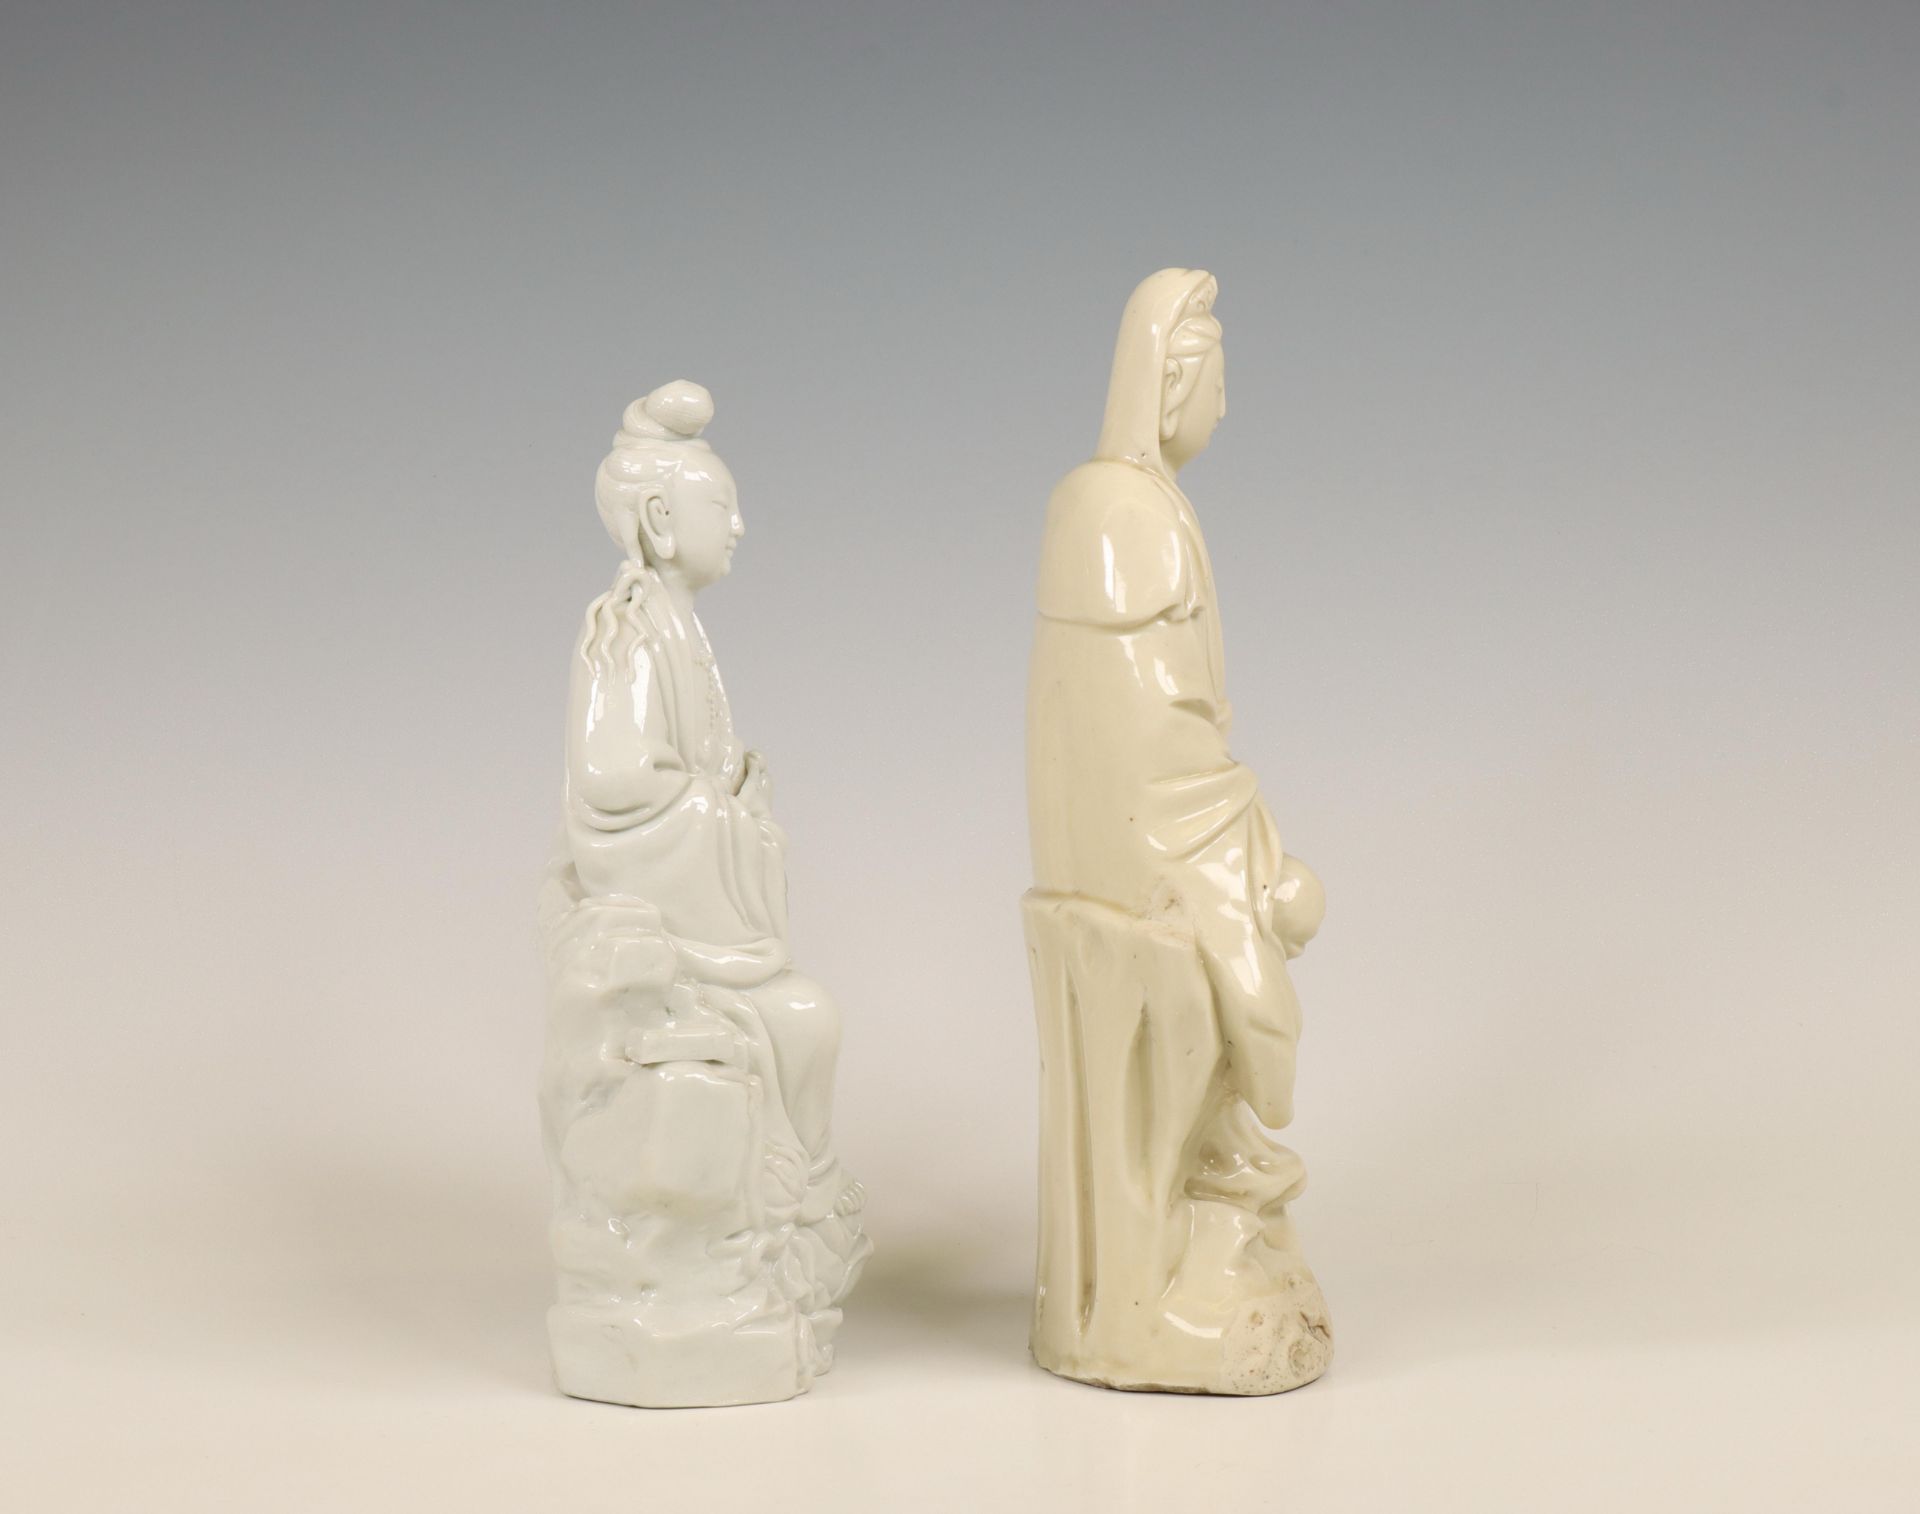 China, two Dehua/ white-glazed porcelain figures of Guanyin, 20th century, - Image 6 of 6